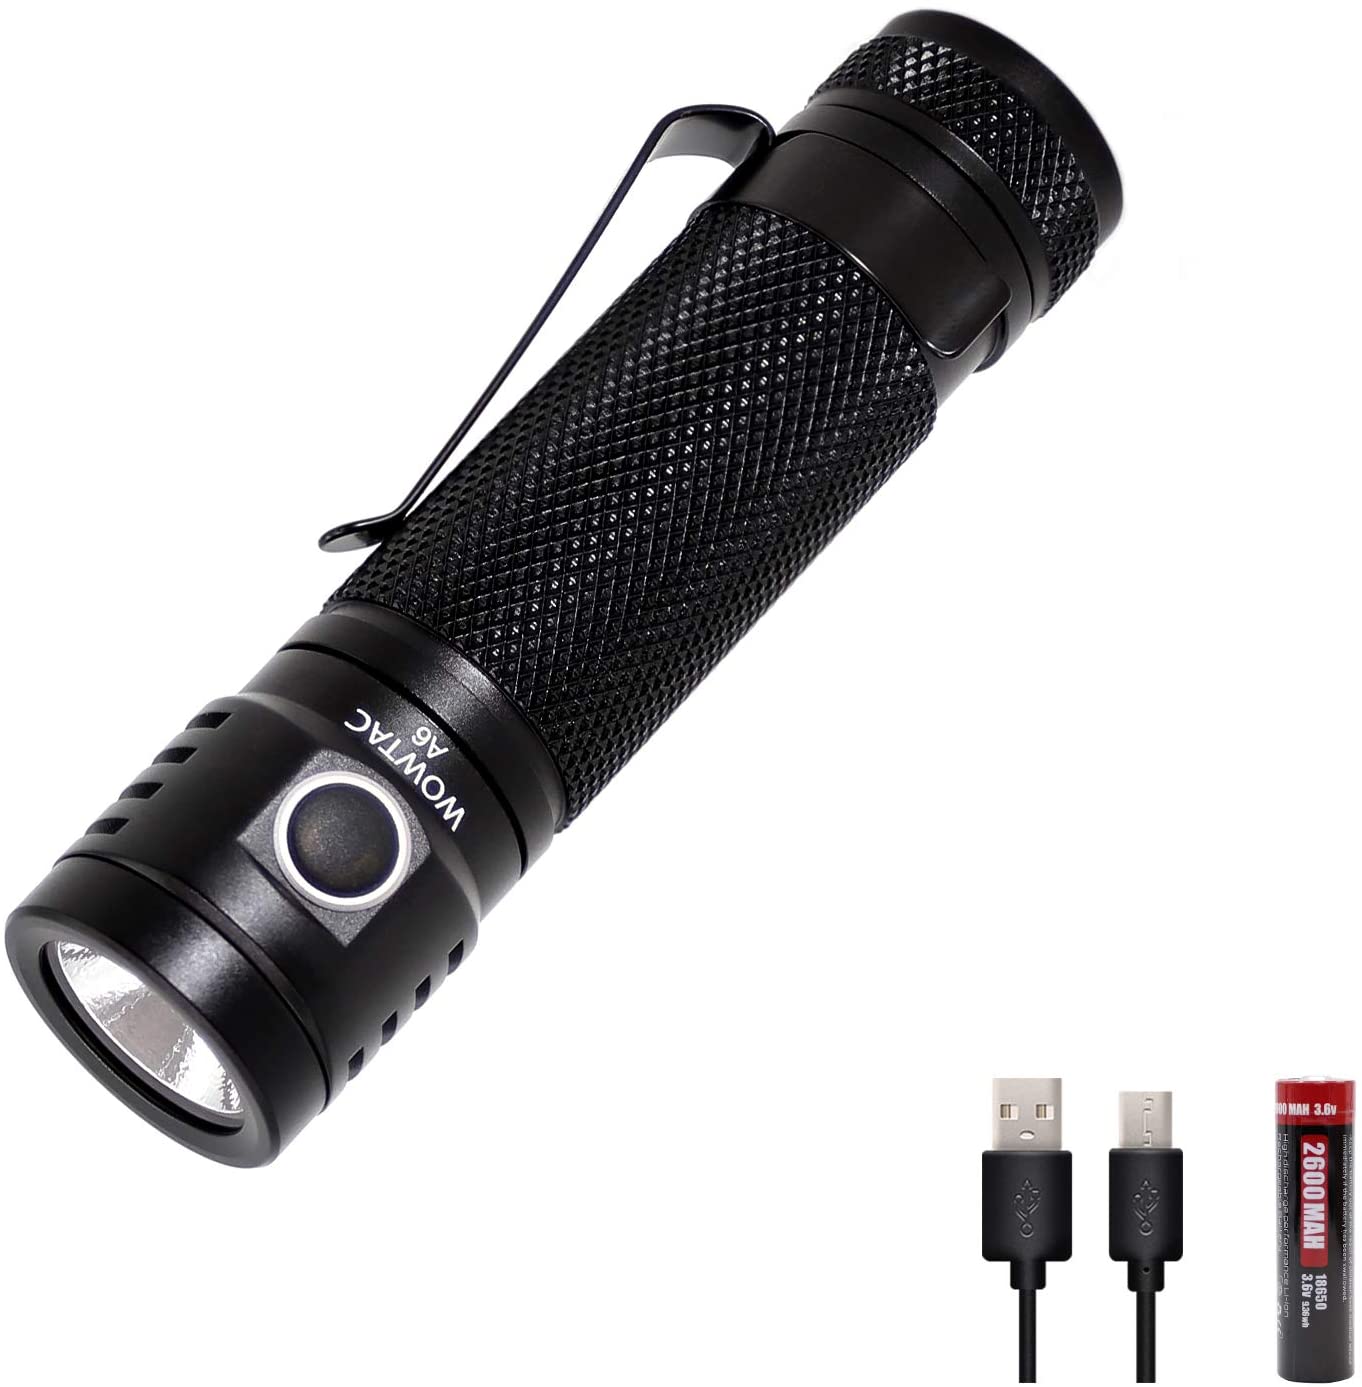 Wowtac A6 rechargeable 18650 LED flashlight - $22.49 Amazon Prime, sold by Atacticaldirect